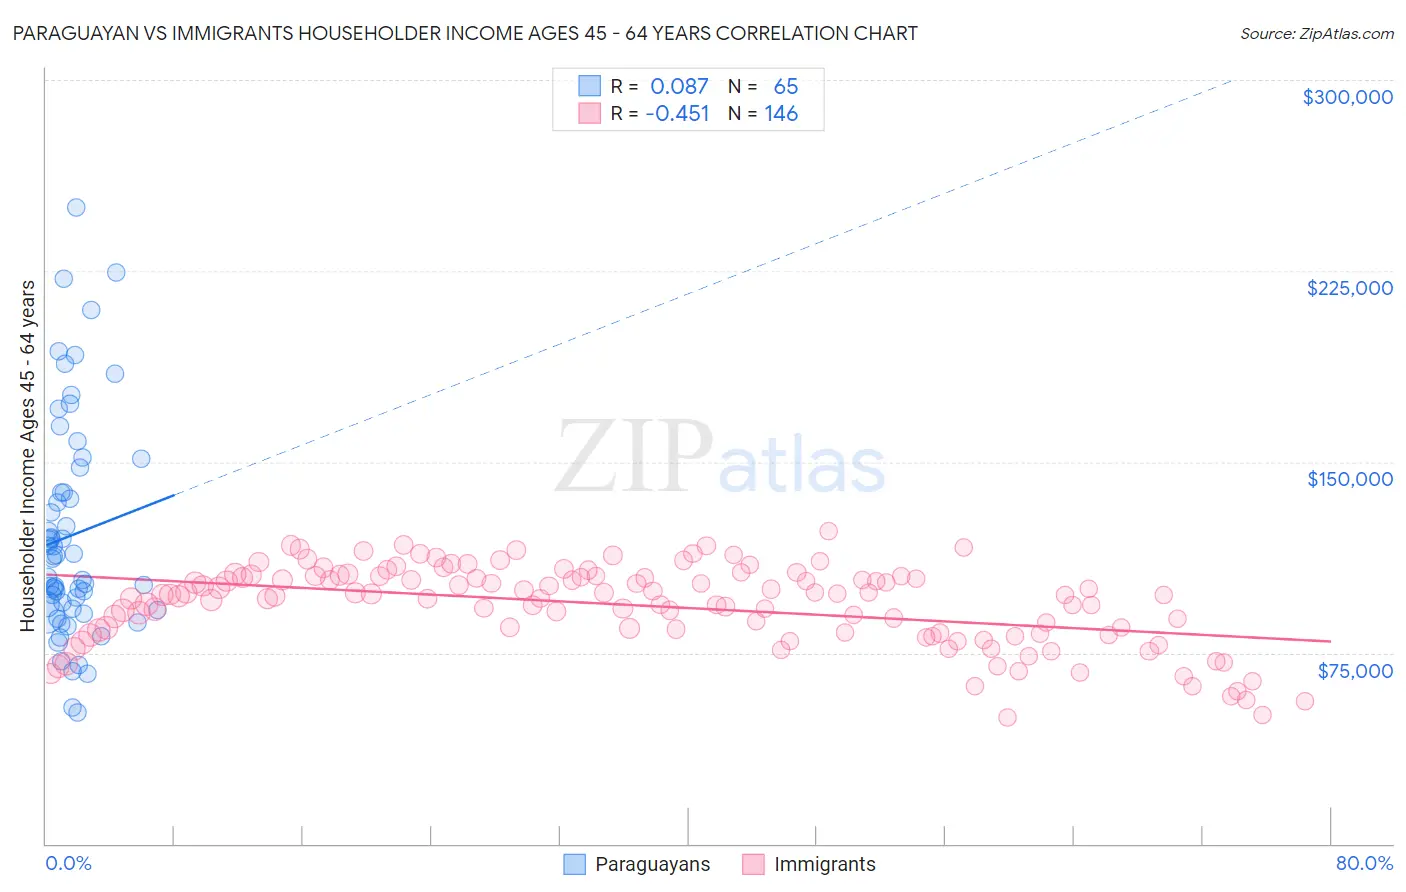 Paraguayan vs Immigrants Householder Income Ages 45 - 64 years